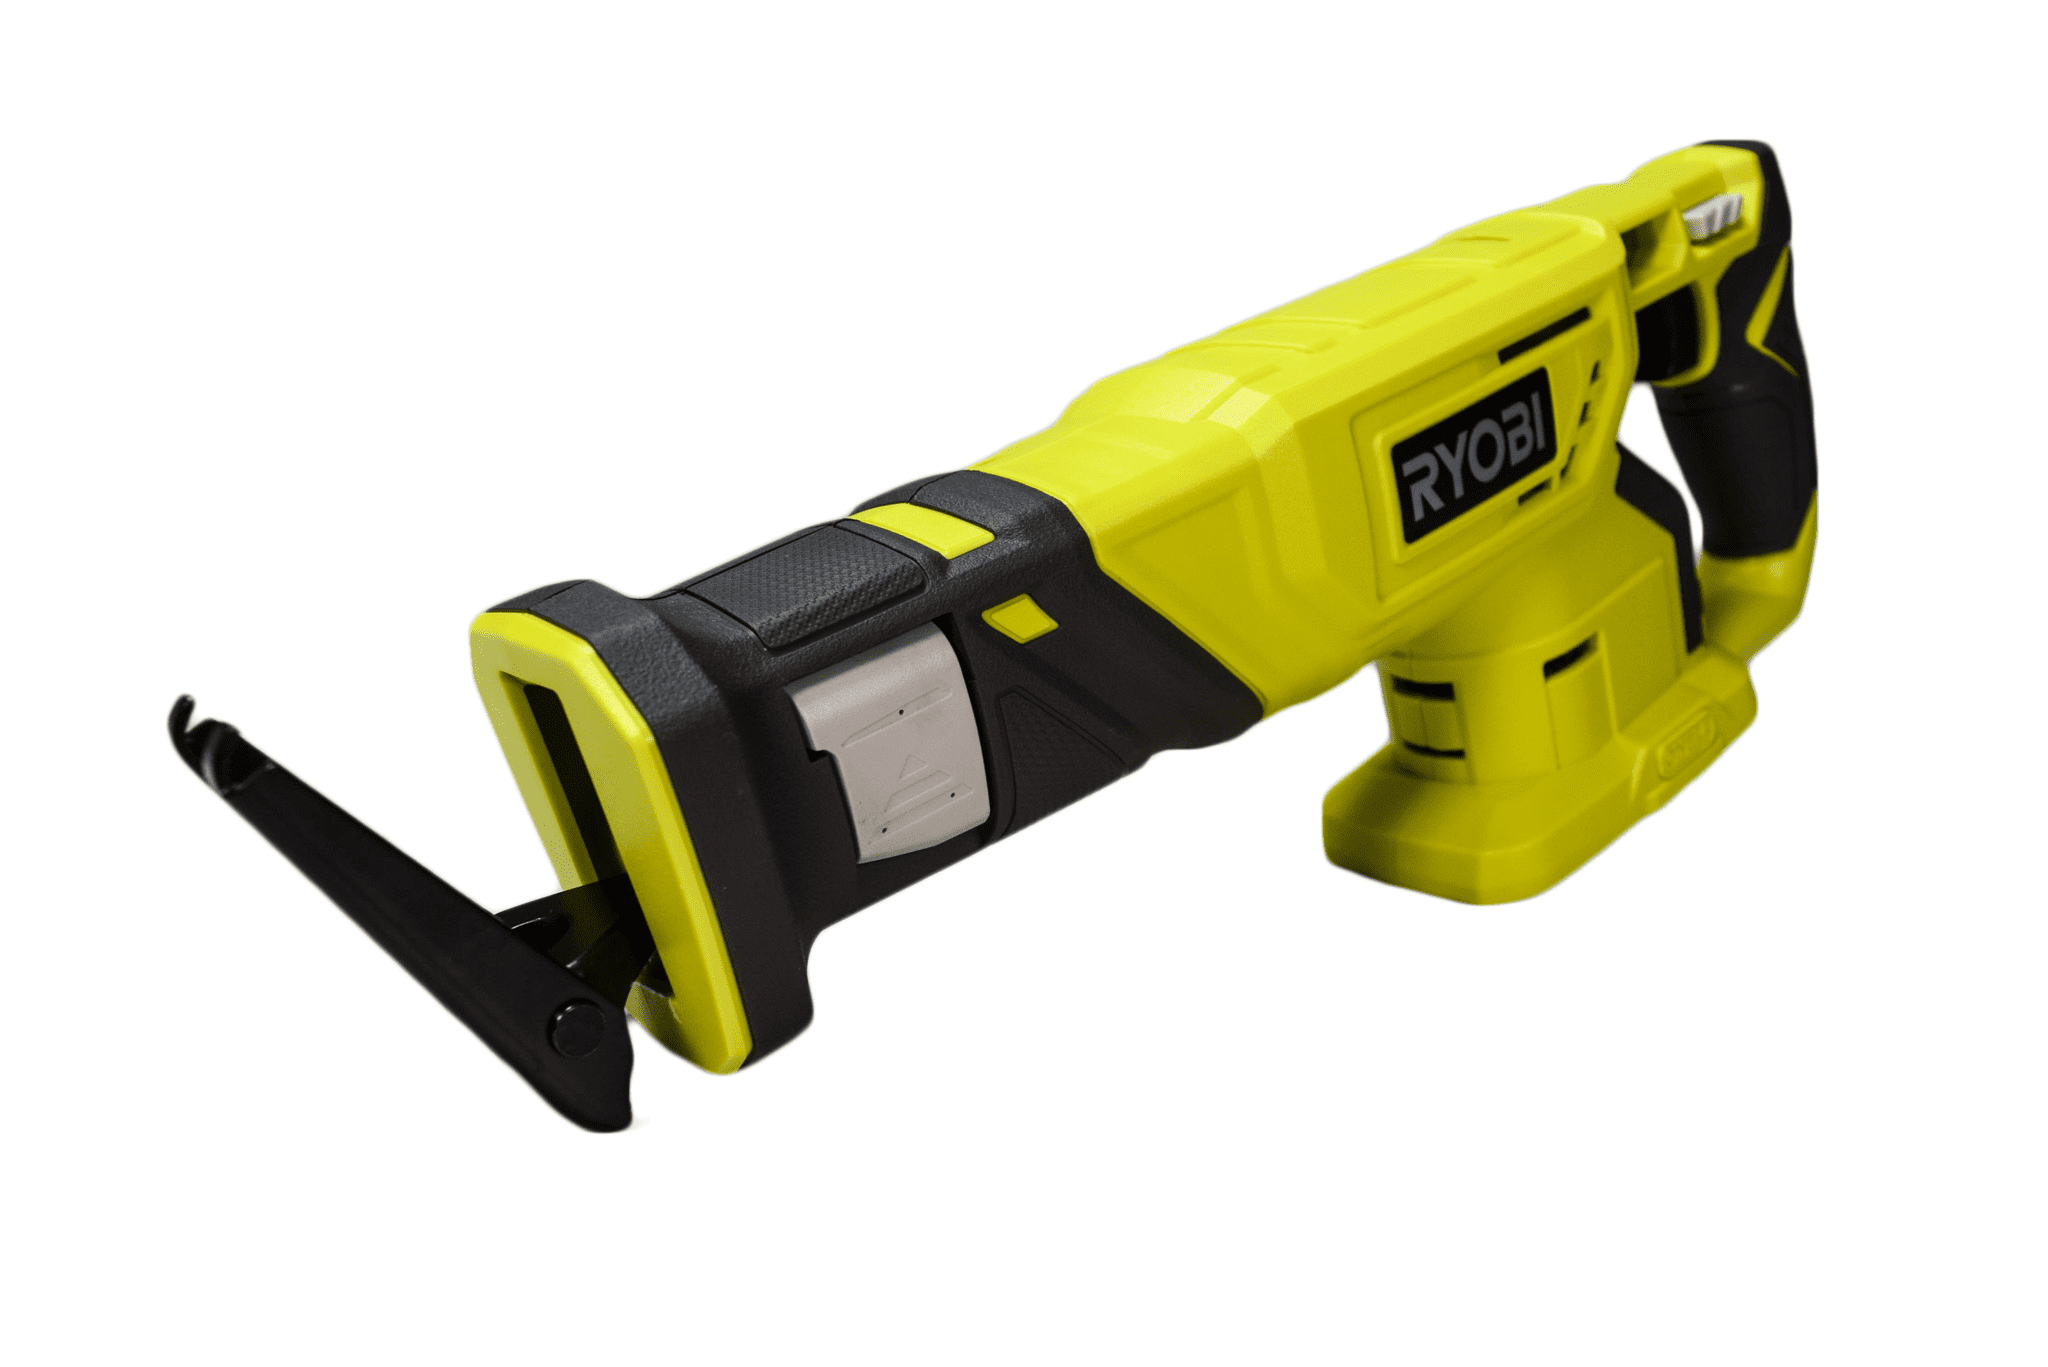 Ryobi R18rs One 18v Cordless Reciprocating Saw No Batteries for sale online 